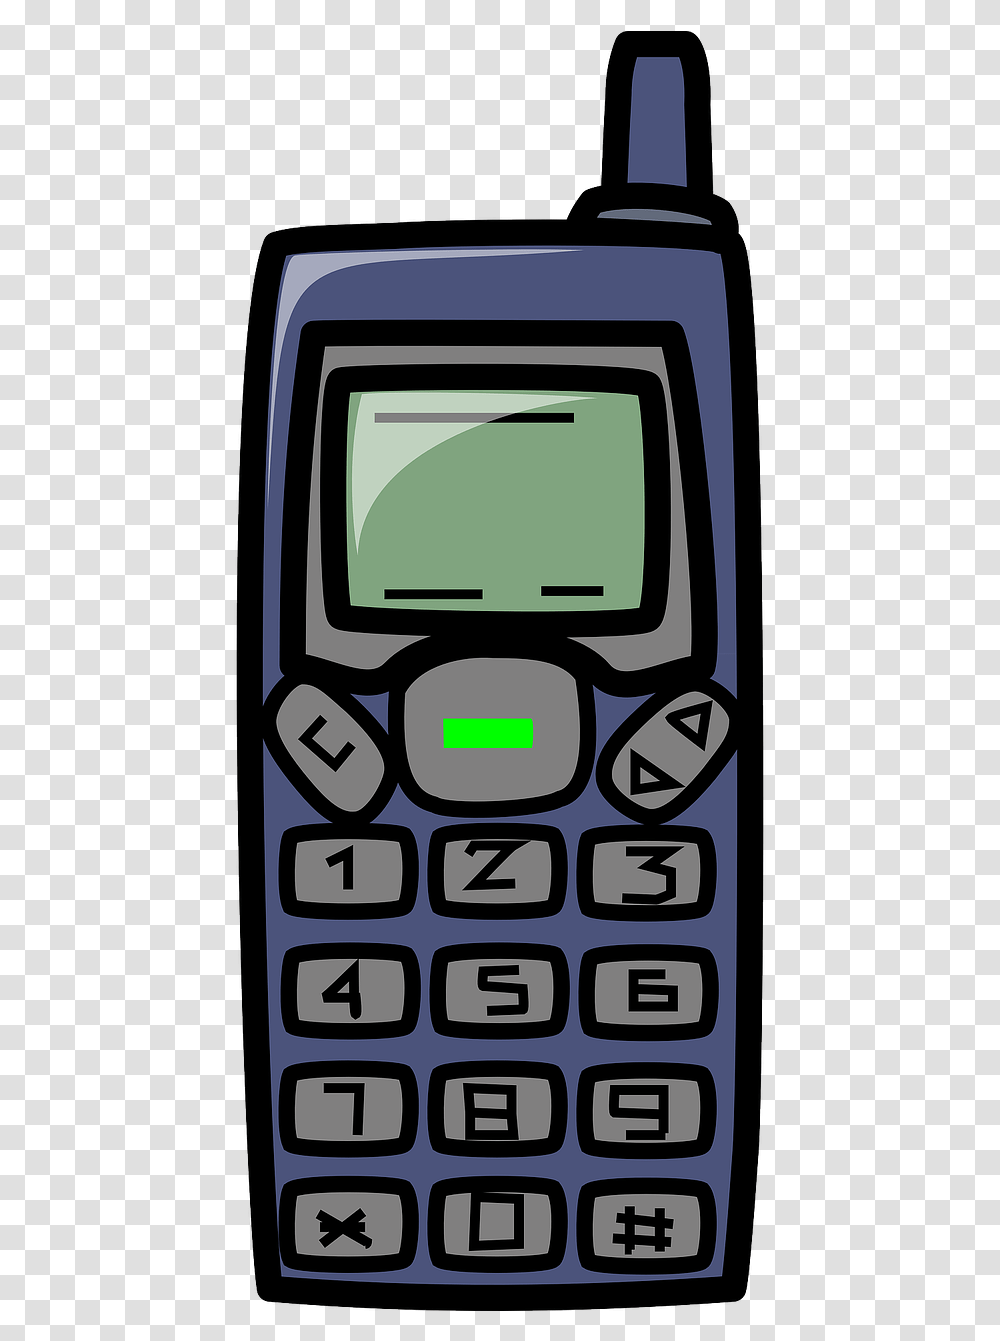 Old Cell Phone Cartoon, Mobile Phone, Electronics, Texting, Hand-Held Computer Transparent Png